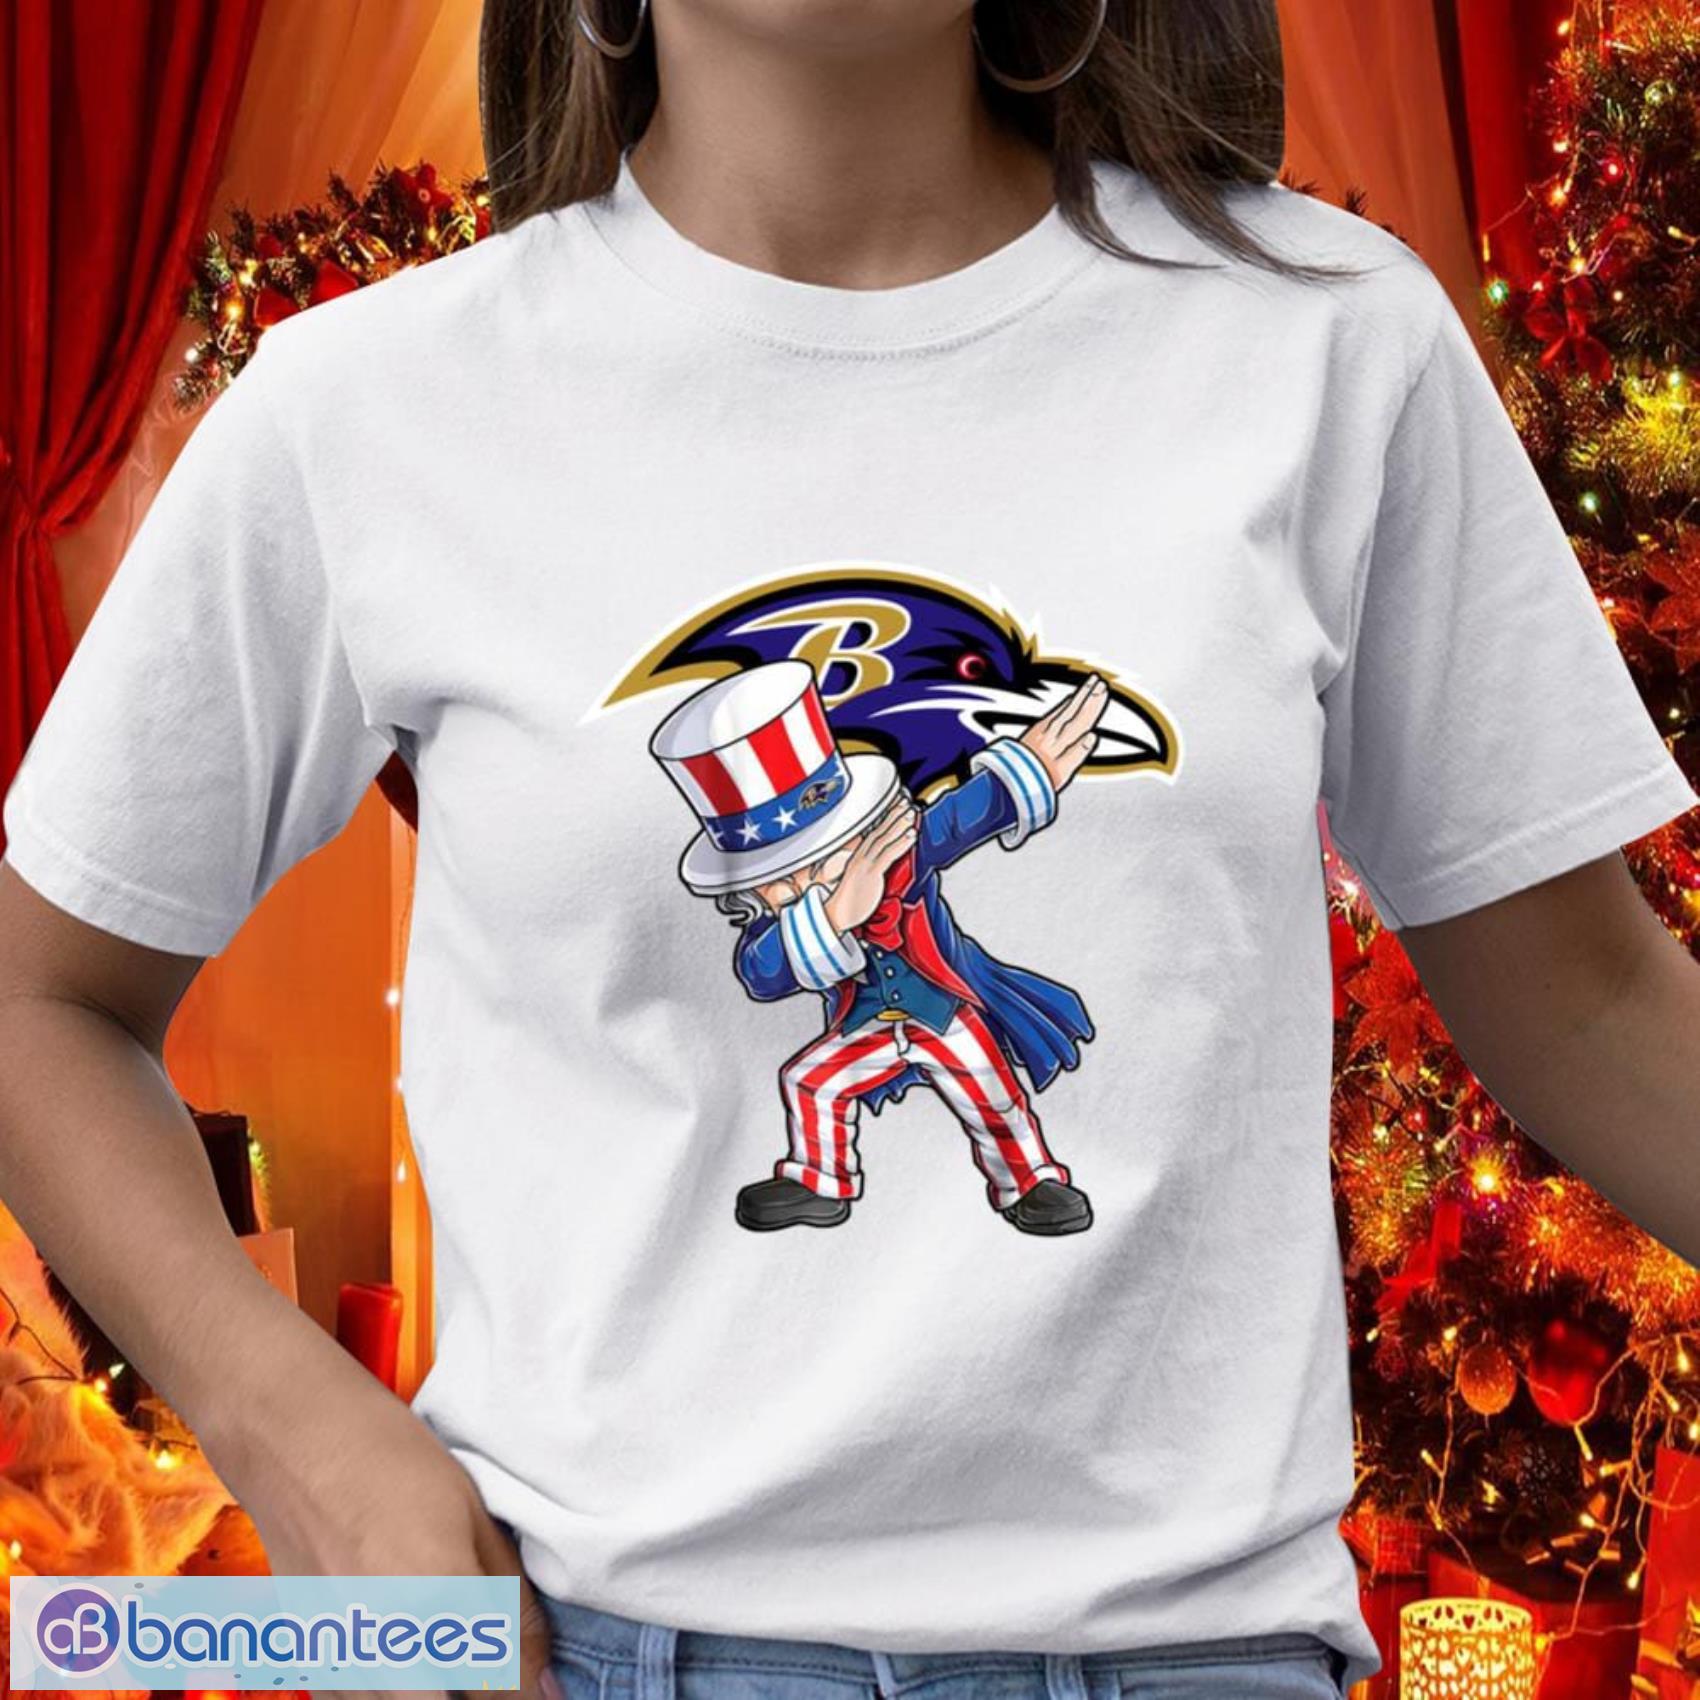 Baltimore Ravens NFL Football Gift Fr Fans Dabbing Uncle Sam The Fourth of July T Shirt - Baltimore Ravens NFL Football Dabbing Uncle Sam The Fourth of July T Shirt_1